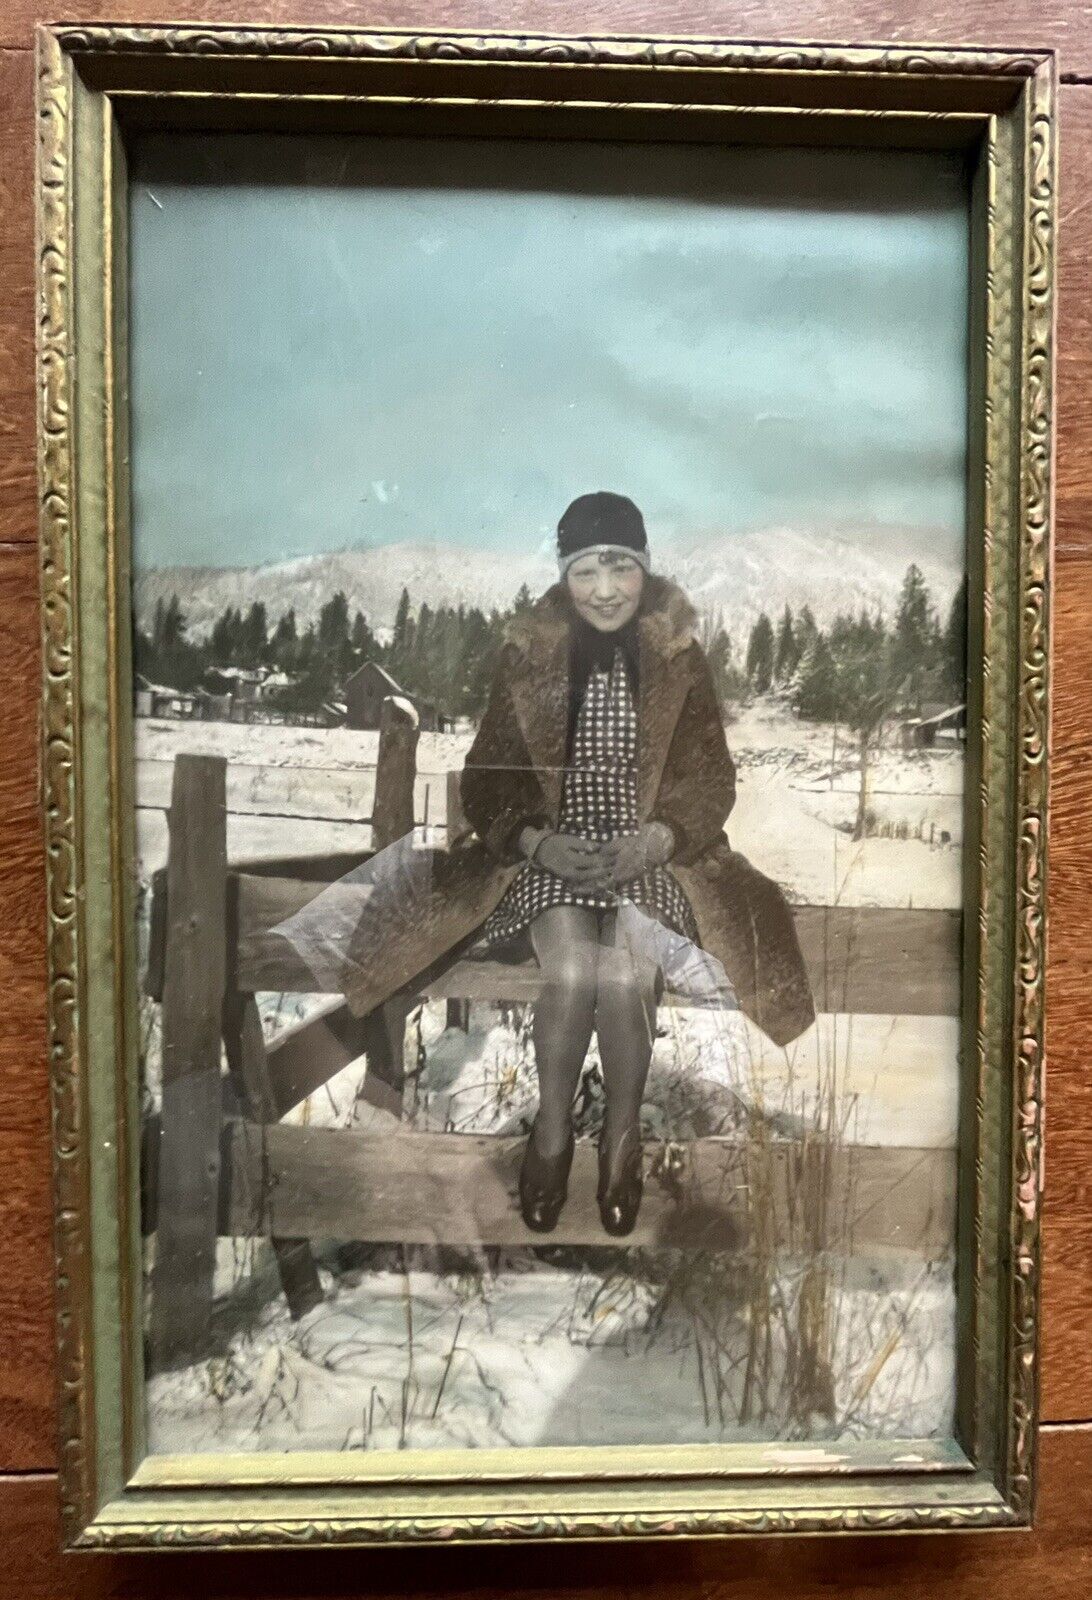 🔥Nice 12”x8” 1920s Tinted Photo Young Girl Sitting on a Fence Wintry Landscape